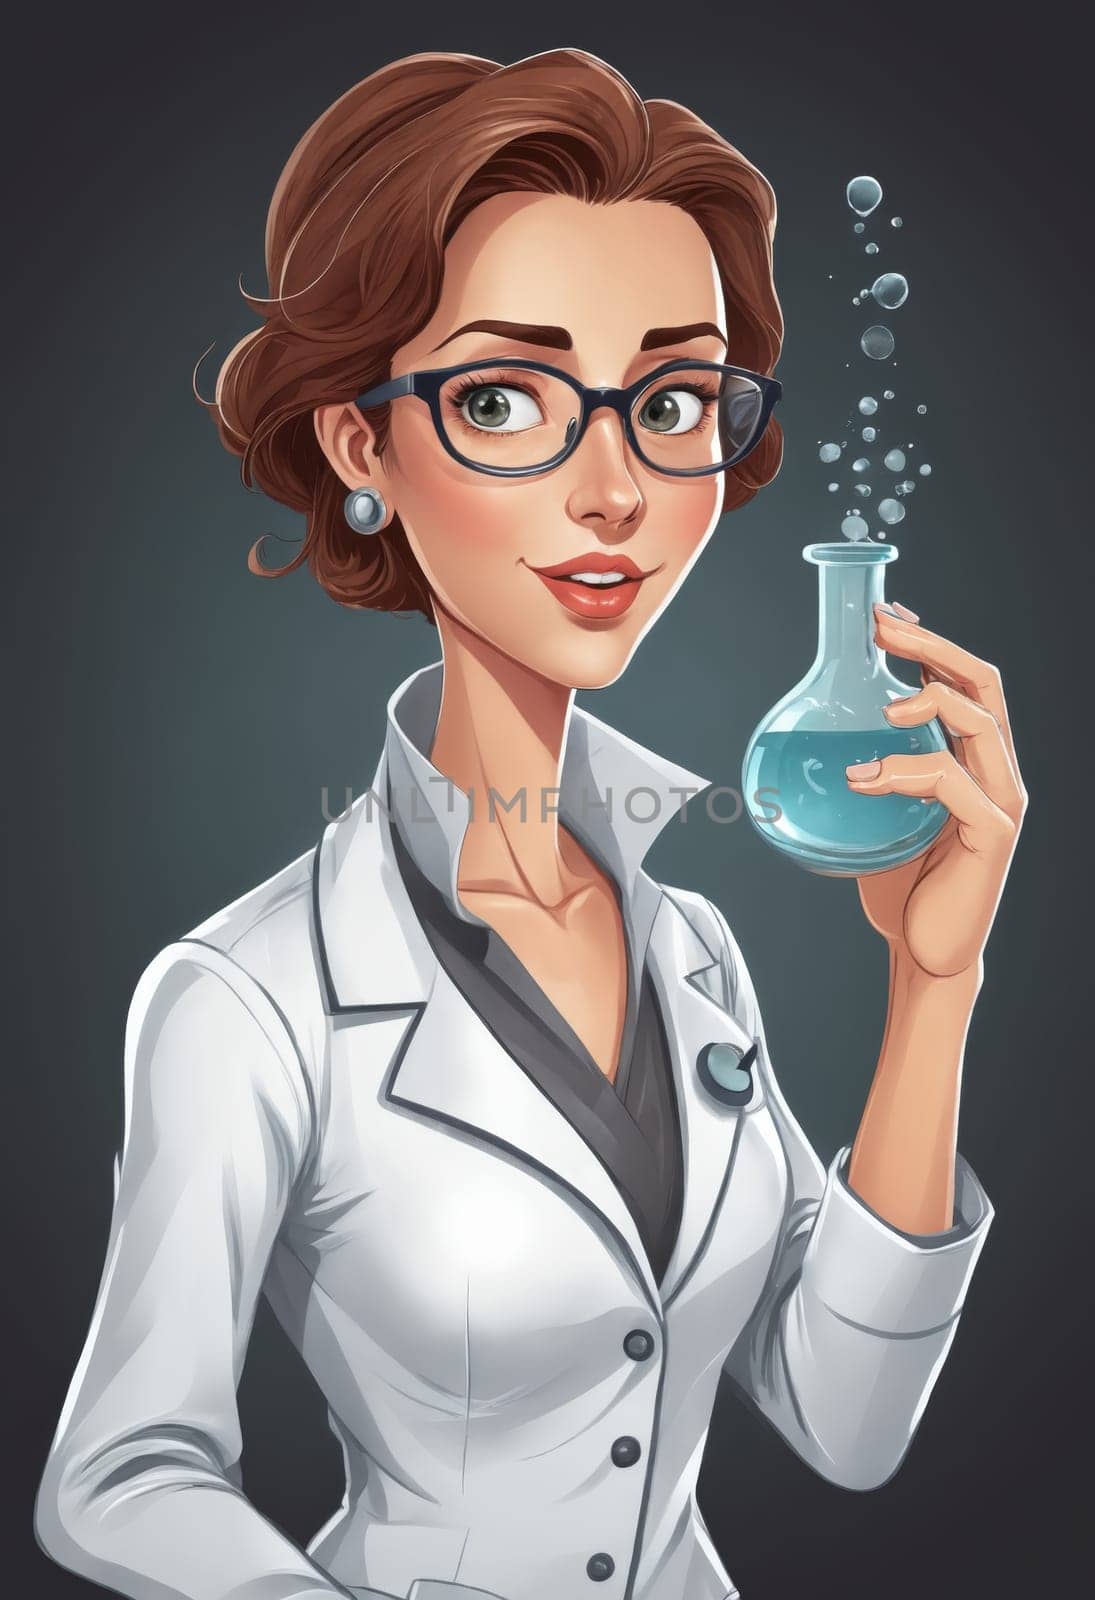 Eureka Moment: Scientist Observes Blue Vapor from Flask by Andre1ns